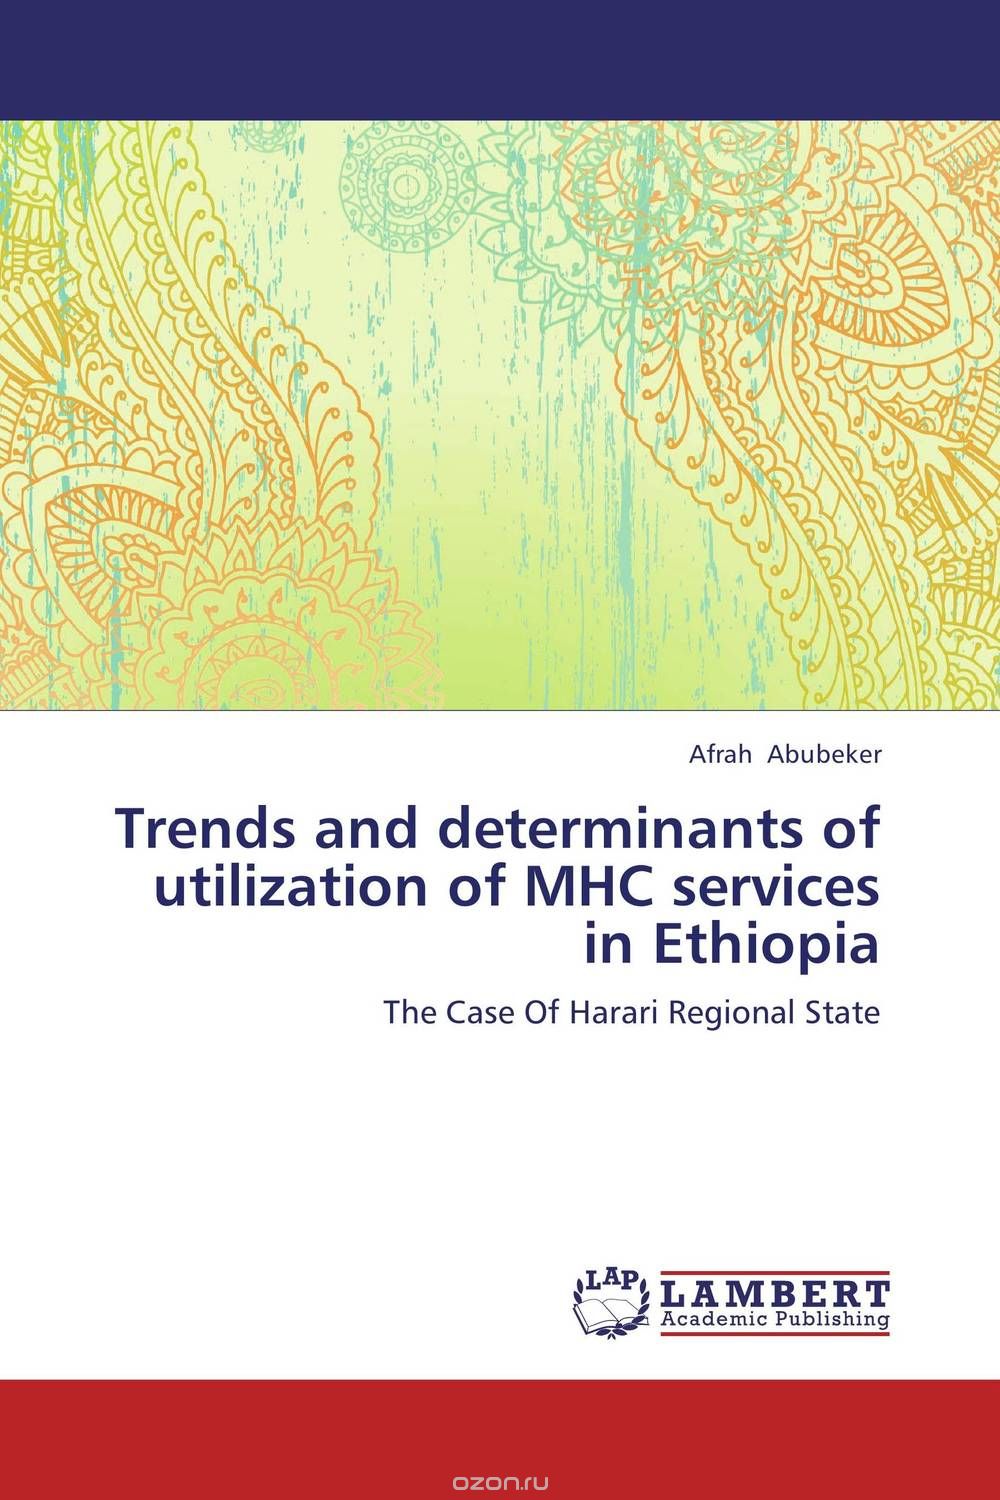 Trends and determinants of utilization of MHC services in Ethiopia